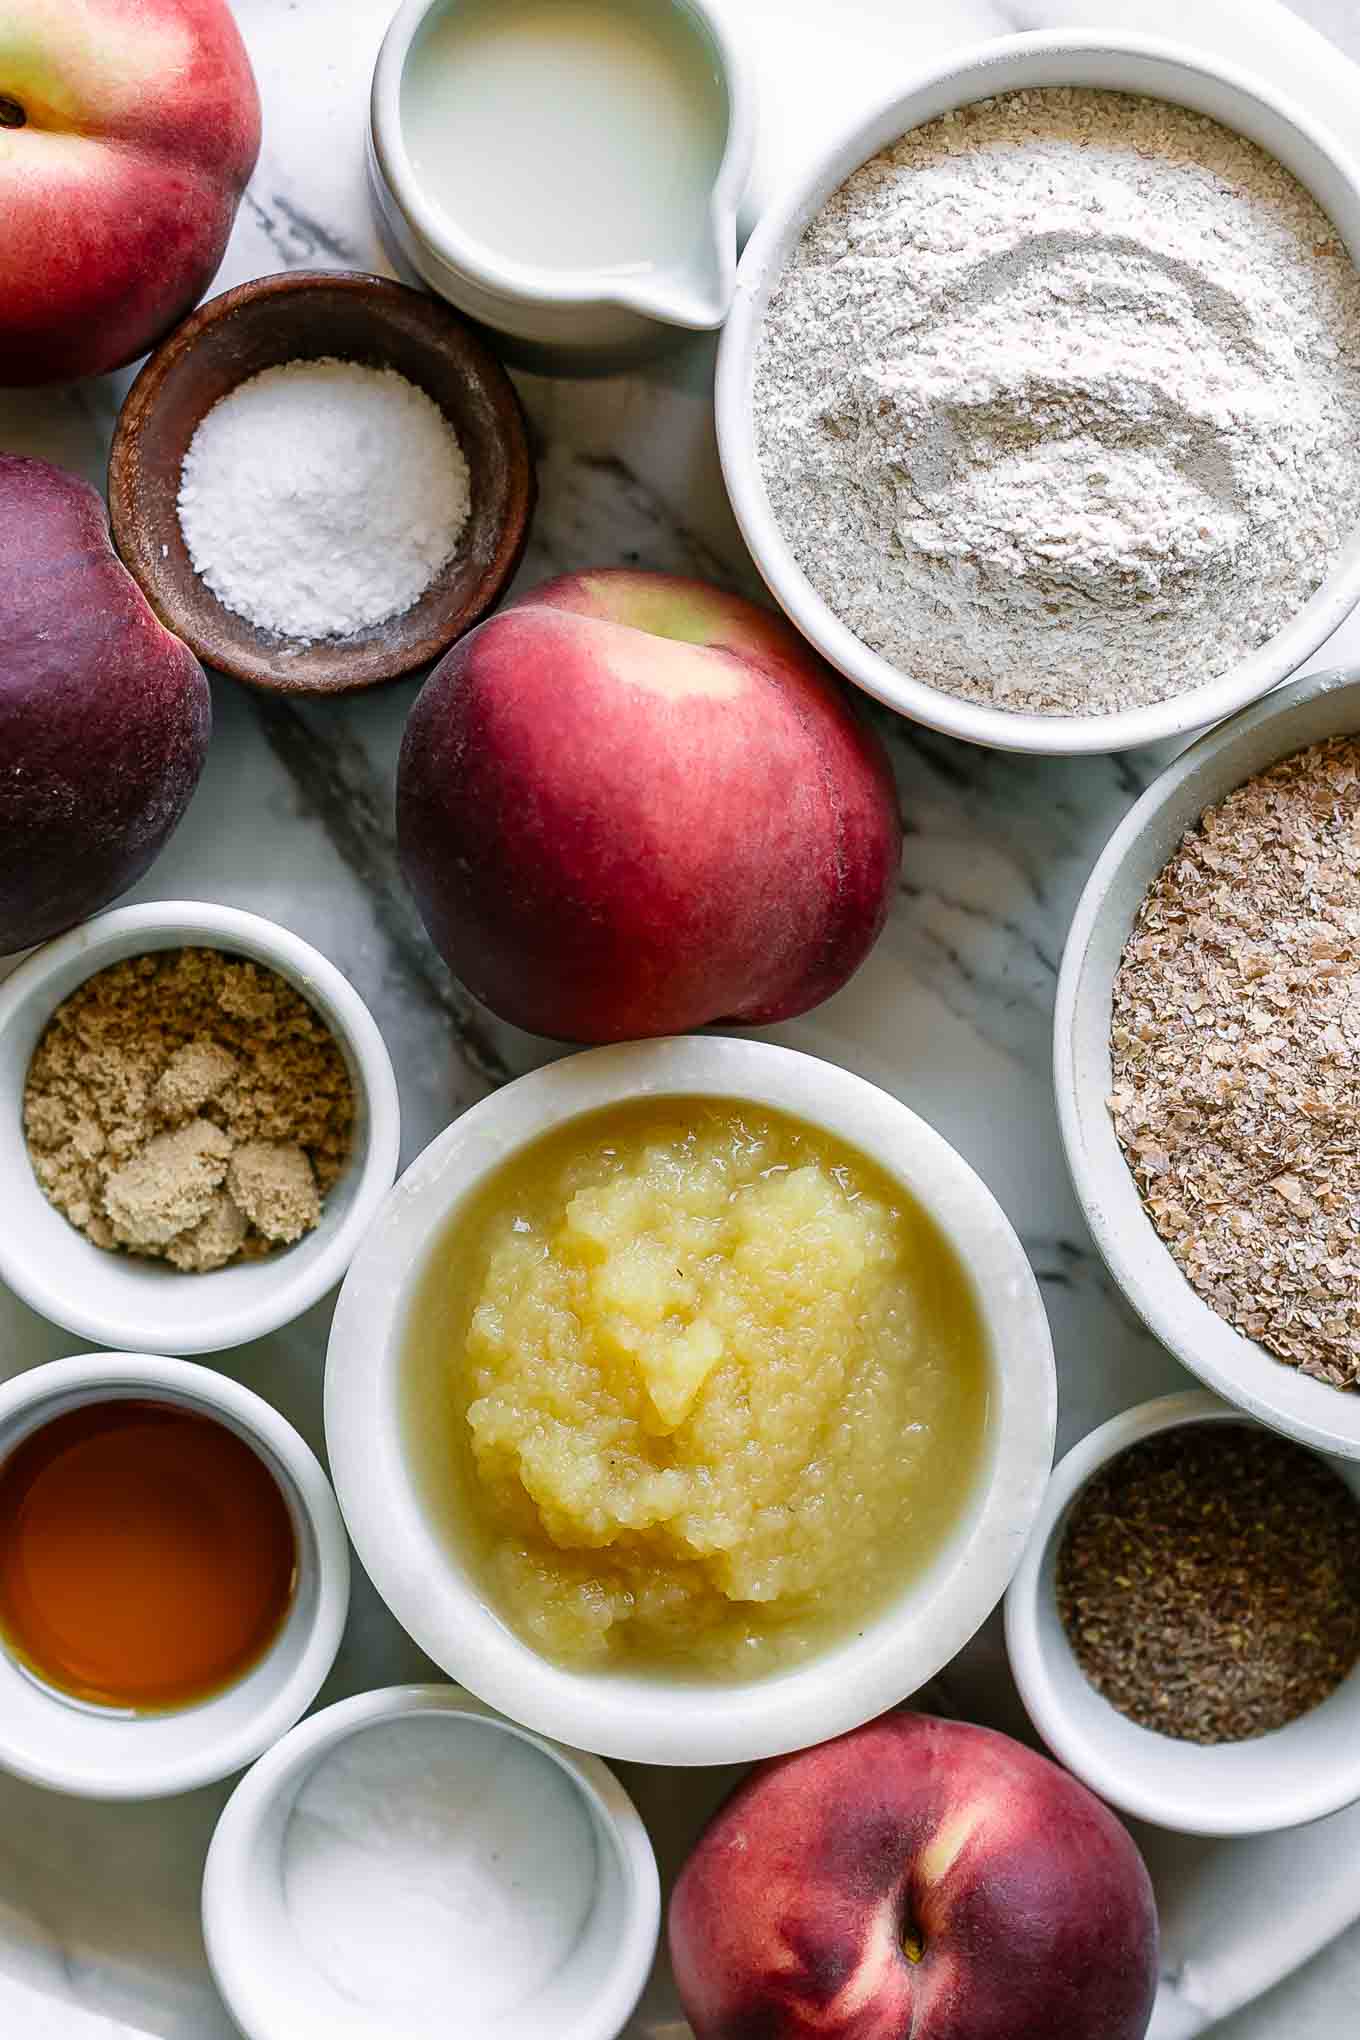 bowls of wheat bran, flour, peaches, applesauce, and other ingredients for peach bran muffins